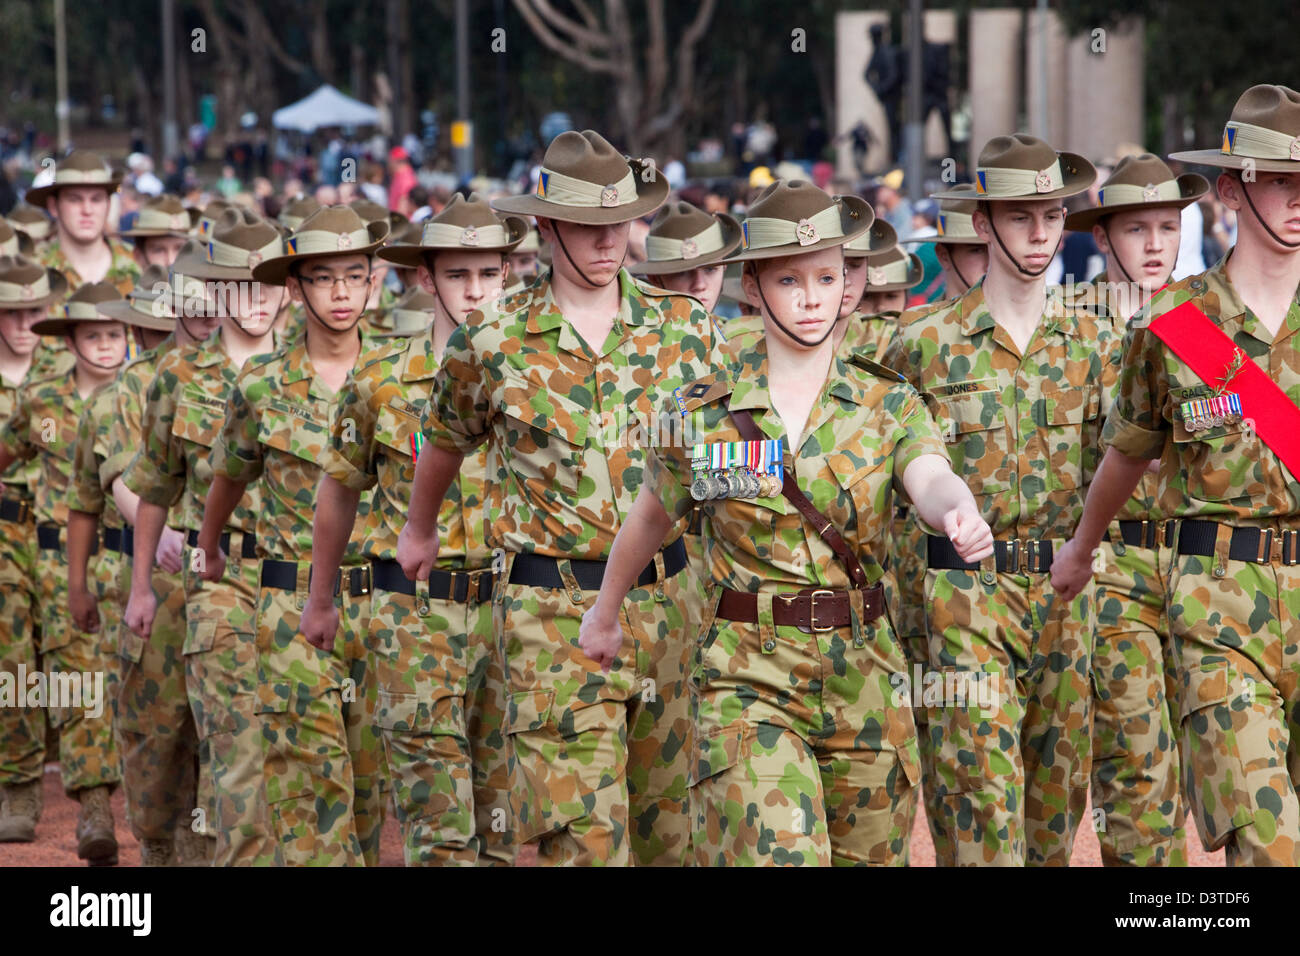 Young Army personnel marching in parade during Anzac Day Commemorations. Canberra, Australian Capital Territory (ACT), Australia Stock Photo